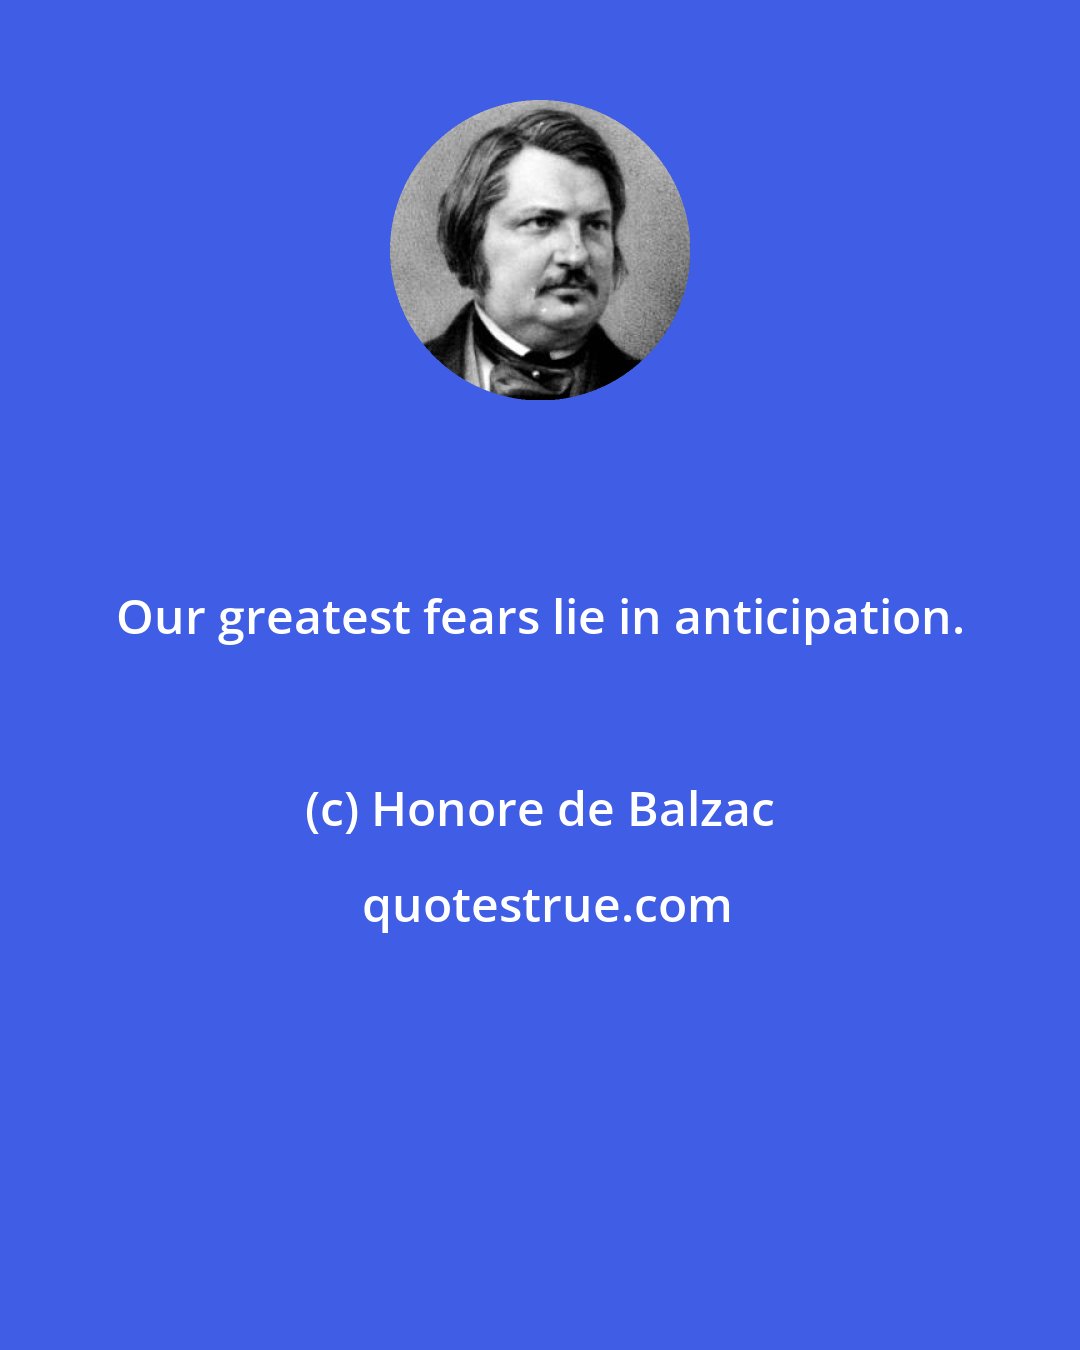 Honore de Balzac: Our greatest fears lie in anticipation.